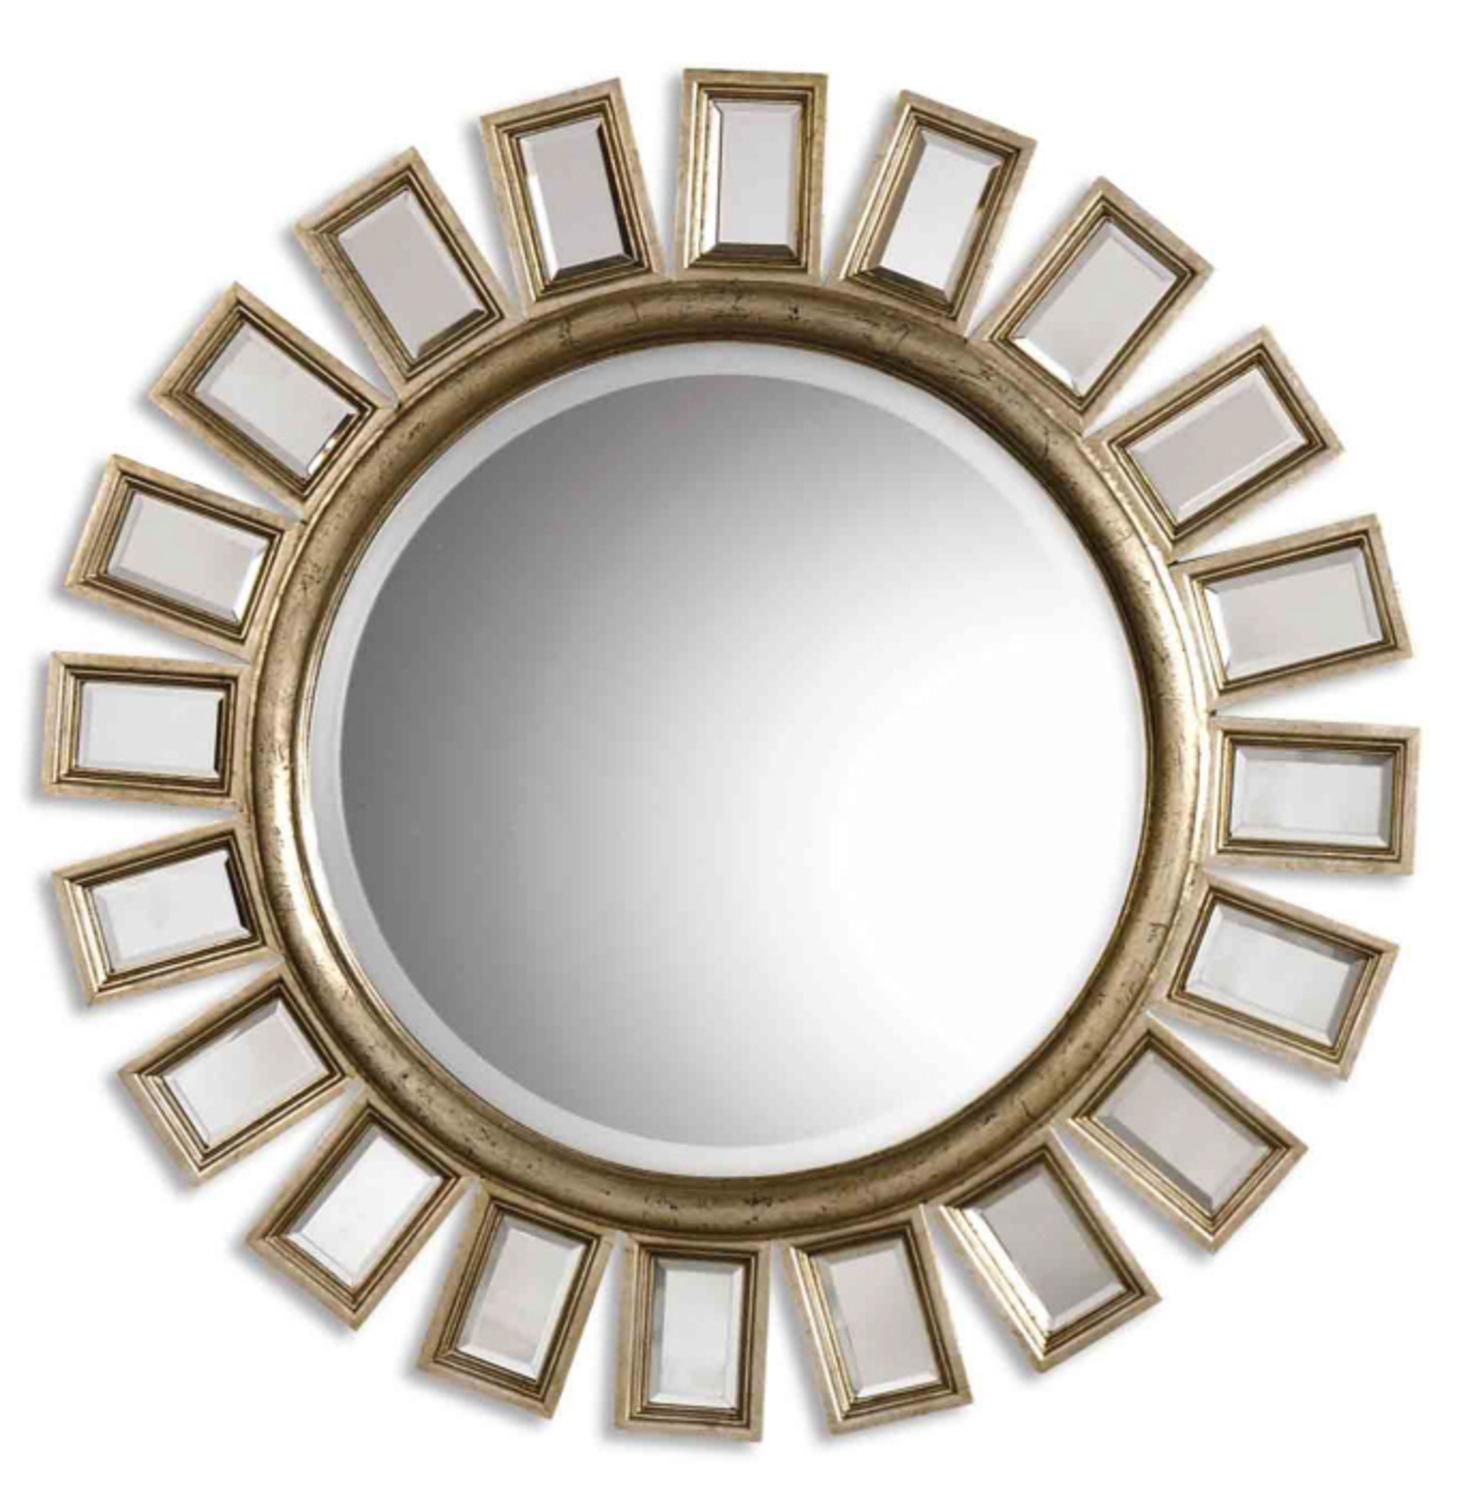 34" Distressed Silver Leaf Finish With Small Mirrors Framed Round Wall Within Scalloped Round Wall Mirrors (View 14 of 15)